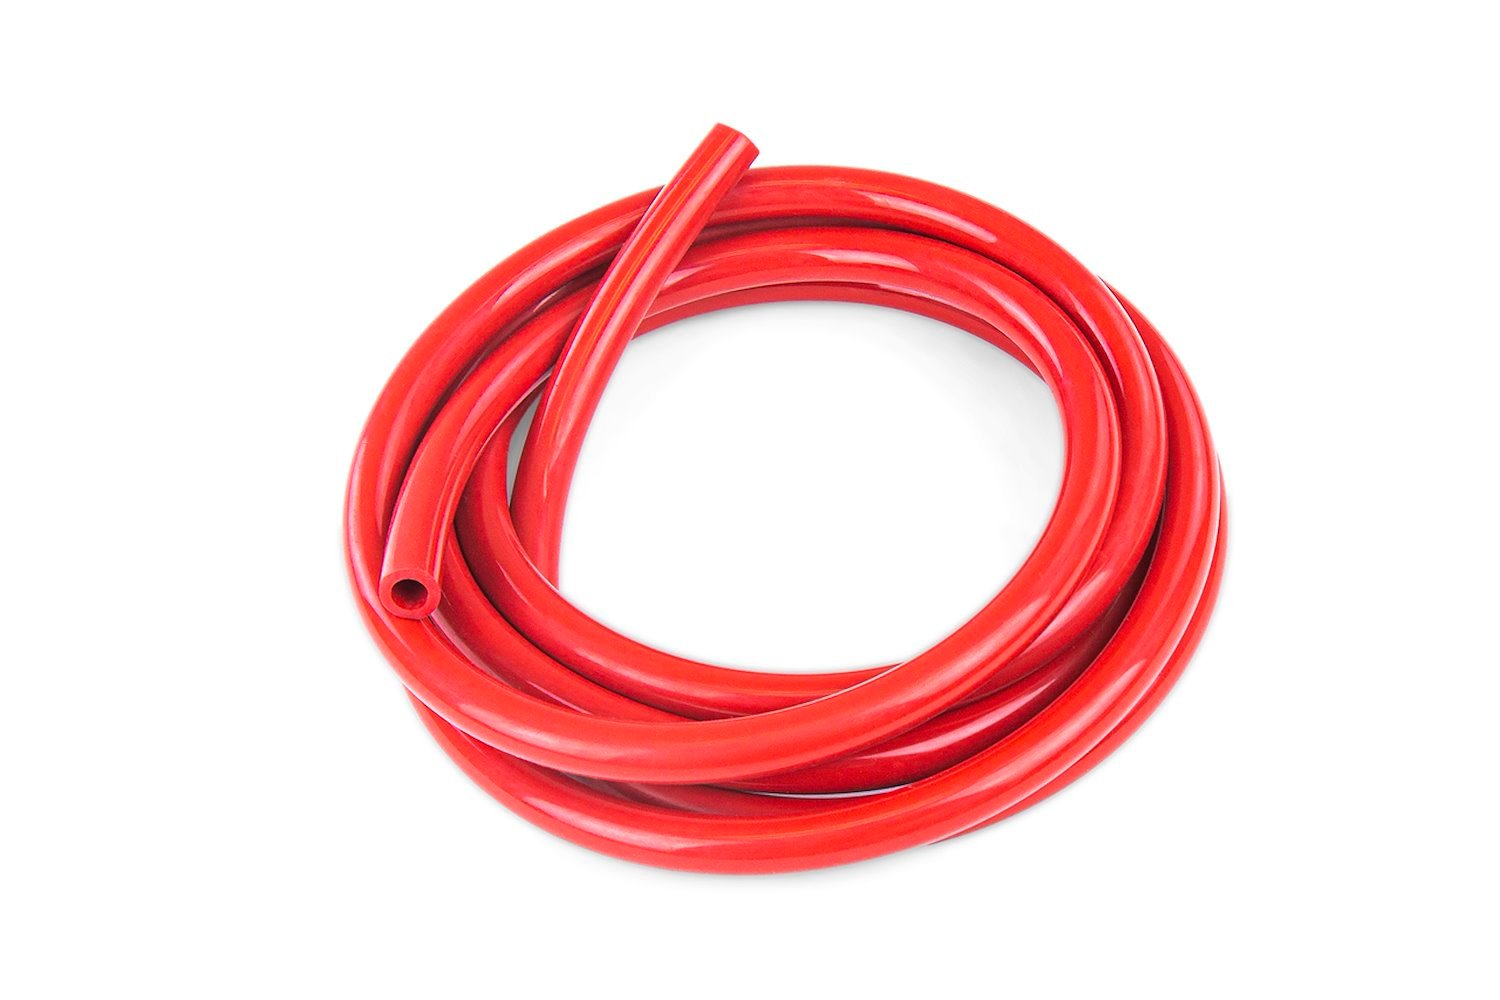 HTSVH2-REDx25 High-Temperature Silicone Vacuum Hose Tubing, 5/64 in. ID, 25 ft. Roll, Red